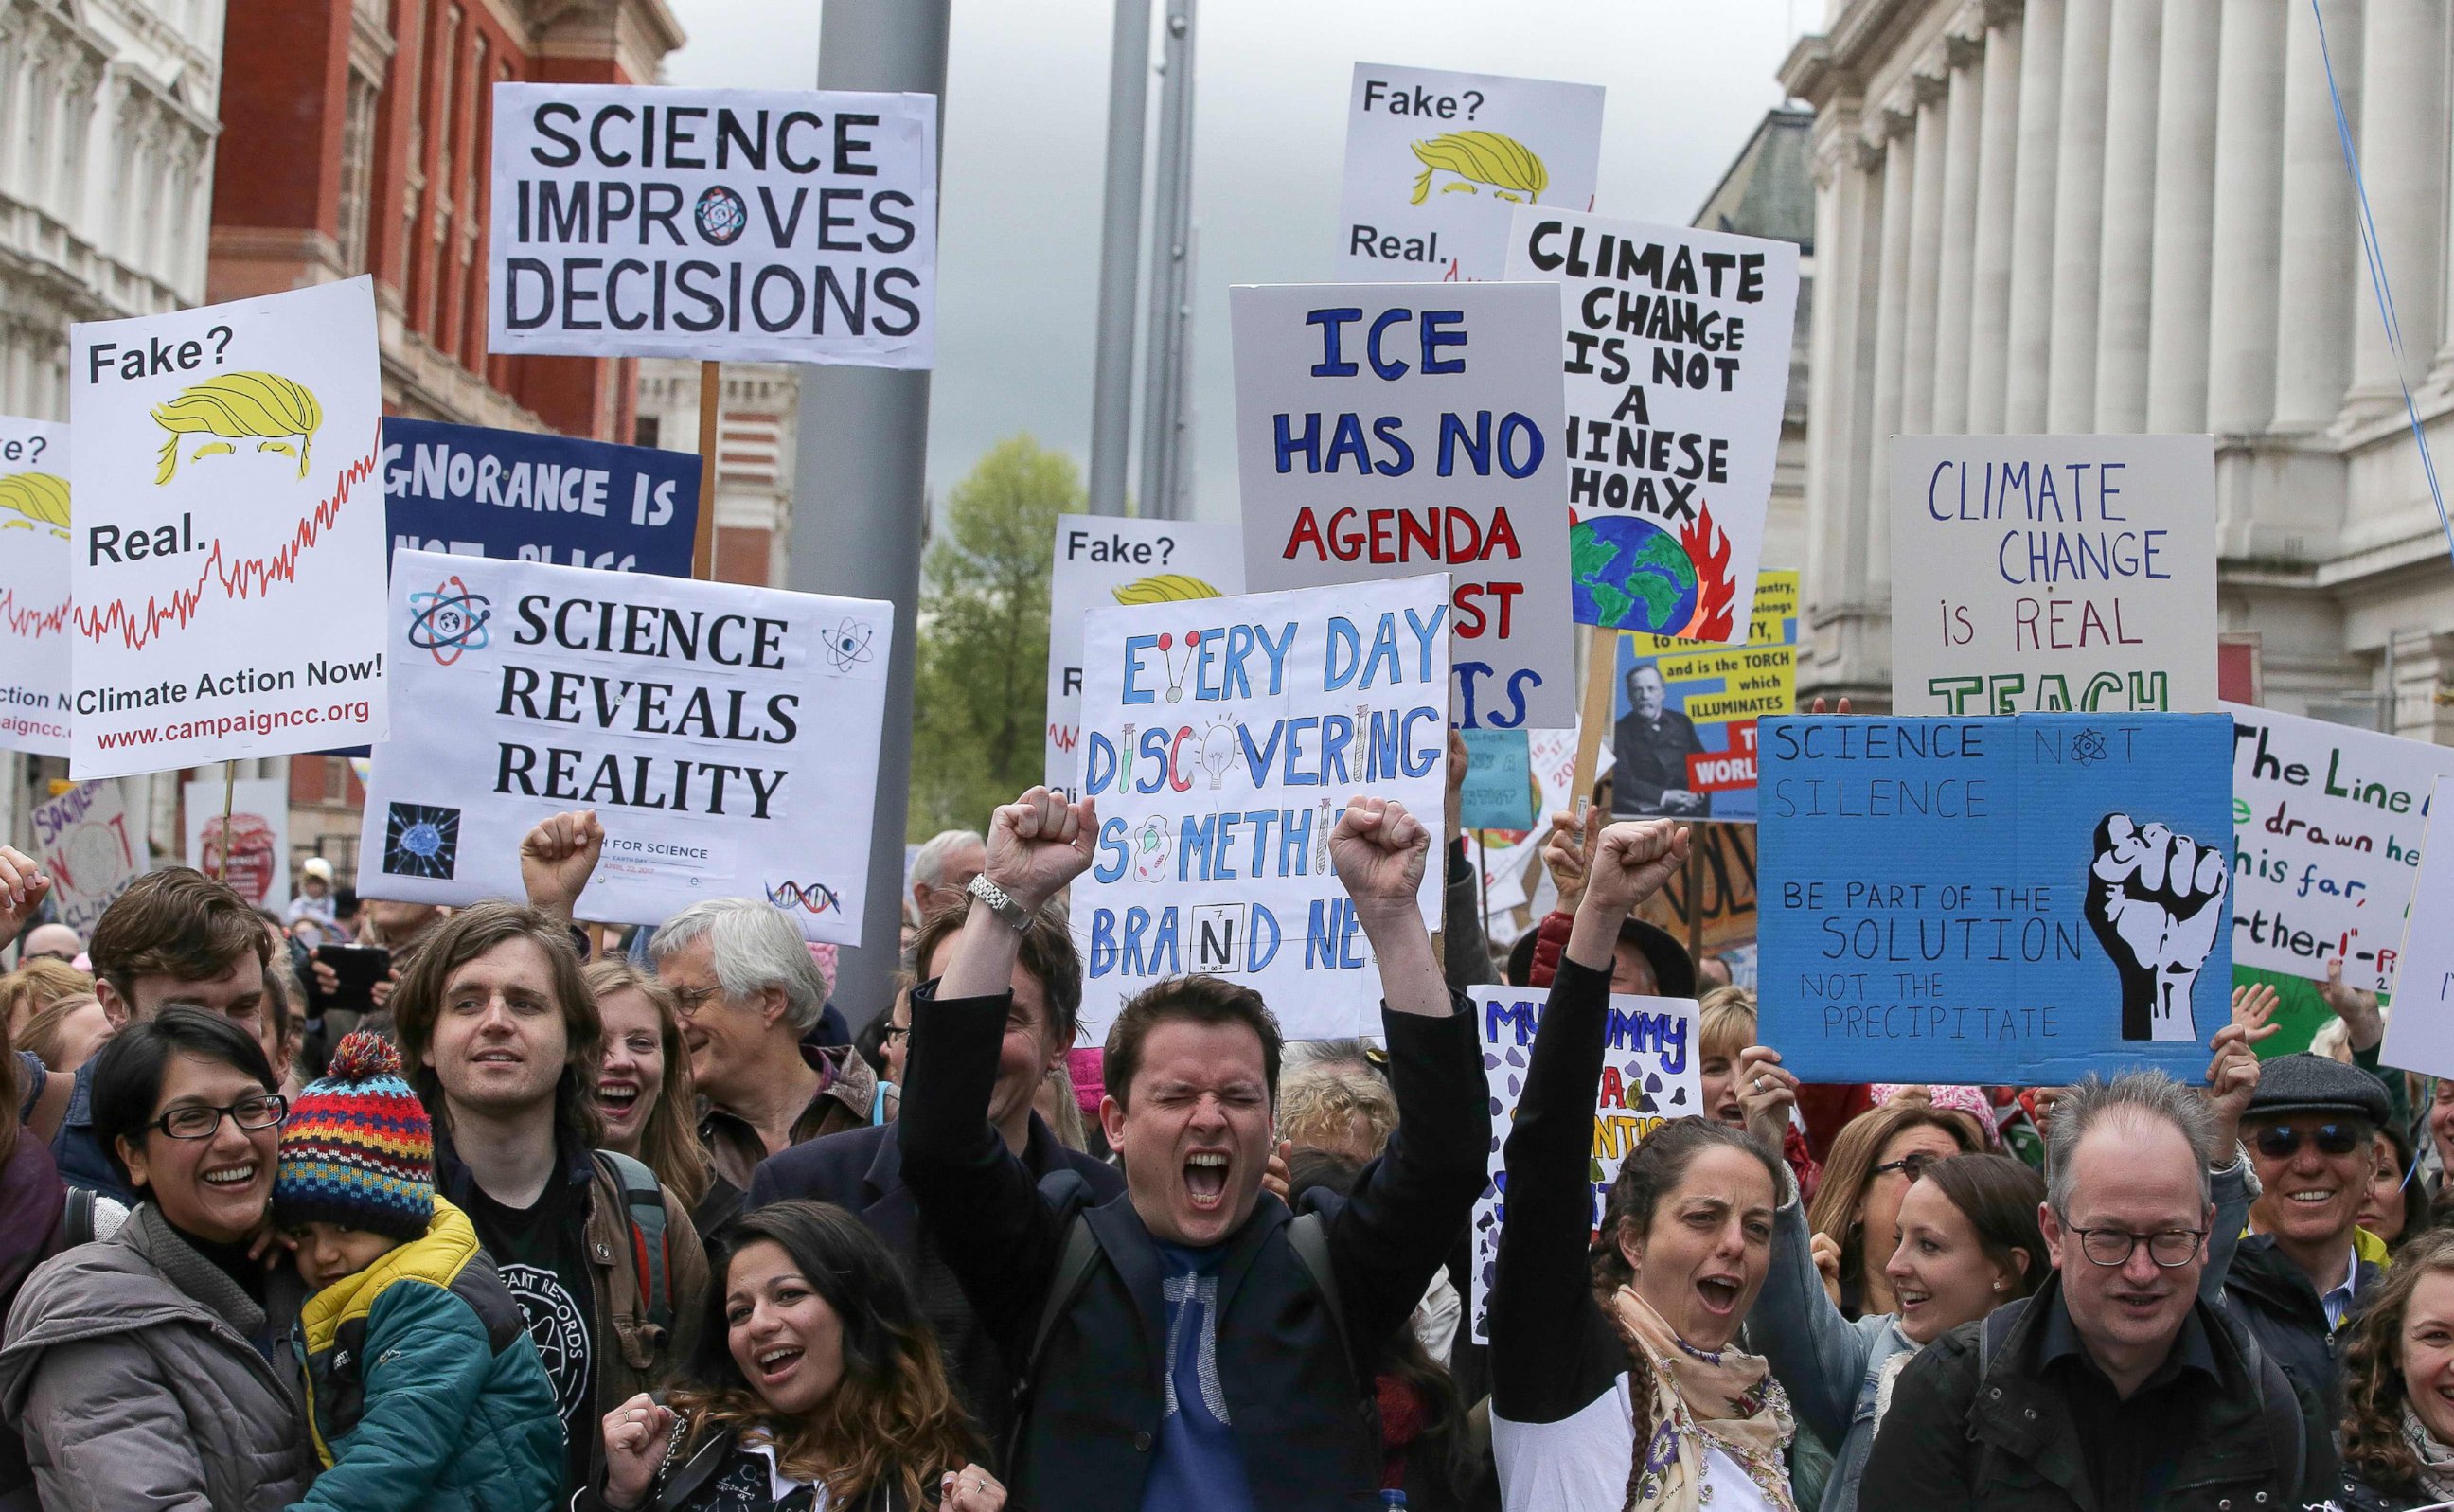 PHOTO: Scientists and science enthusiasts gather prior to the start of the March for Science outside the Science Museum in central London, April 22, 2017.